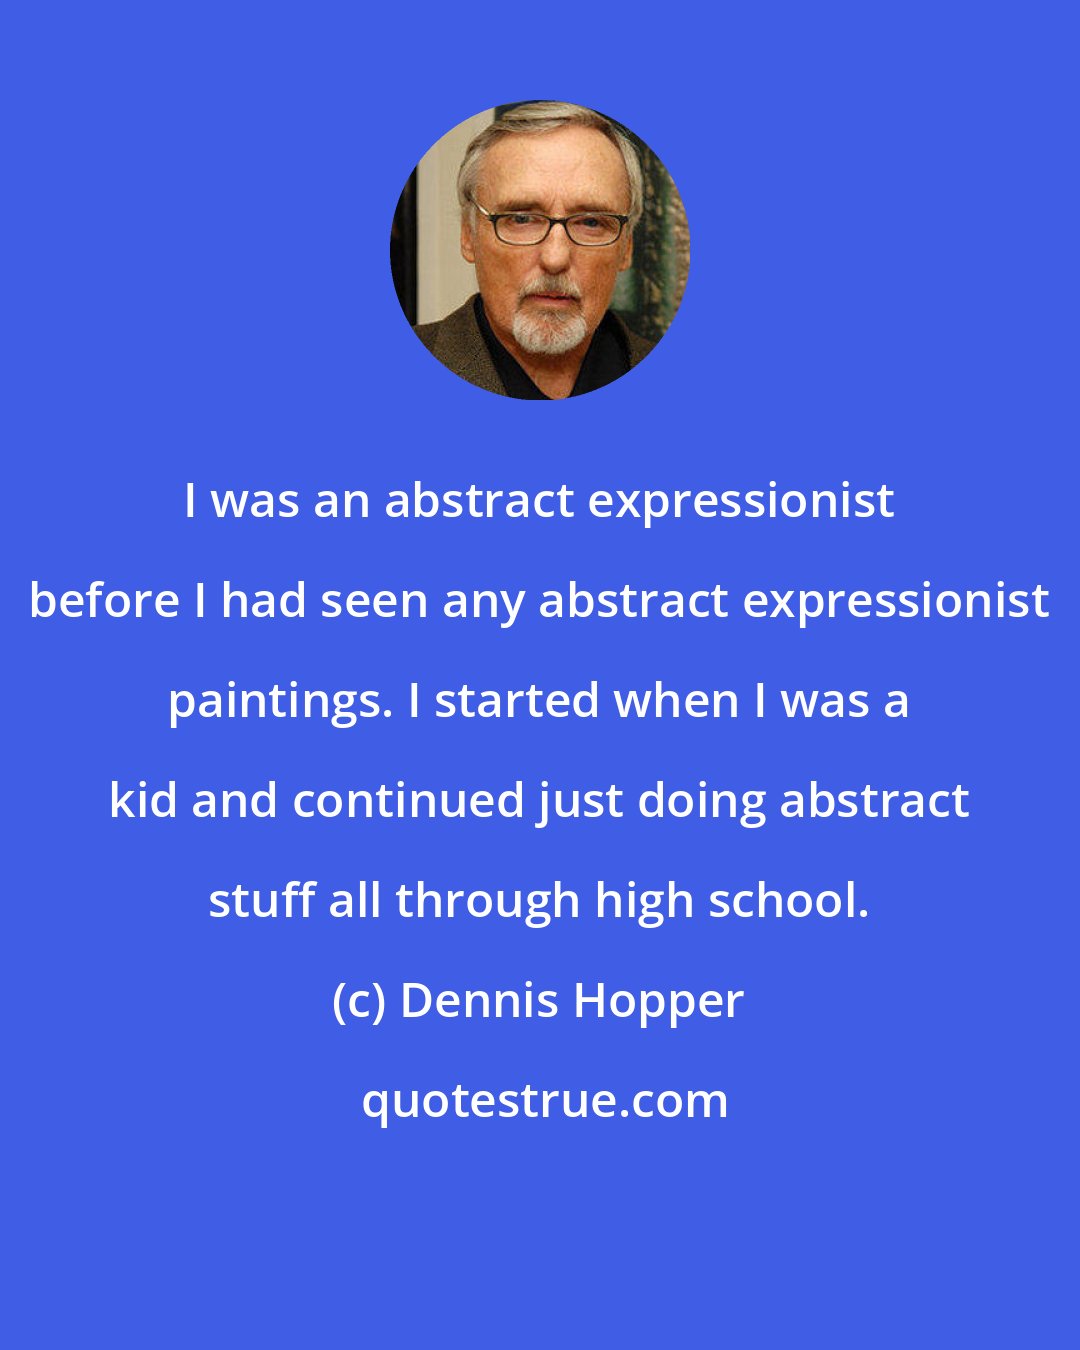 Dennis Hopper: I was an abstract expressionist before I had seen any abstract expressionist paintings. I started when I was a kid and continued just doing abstract stuff all through high school.